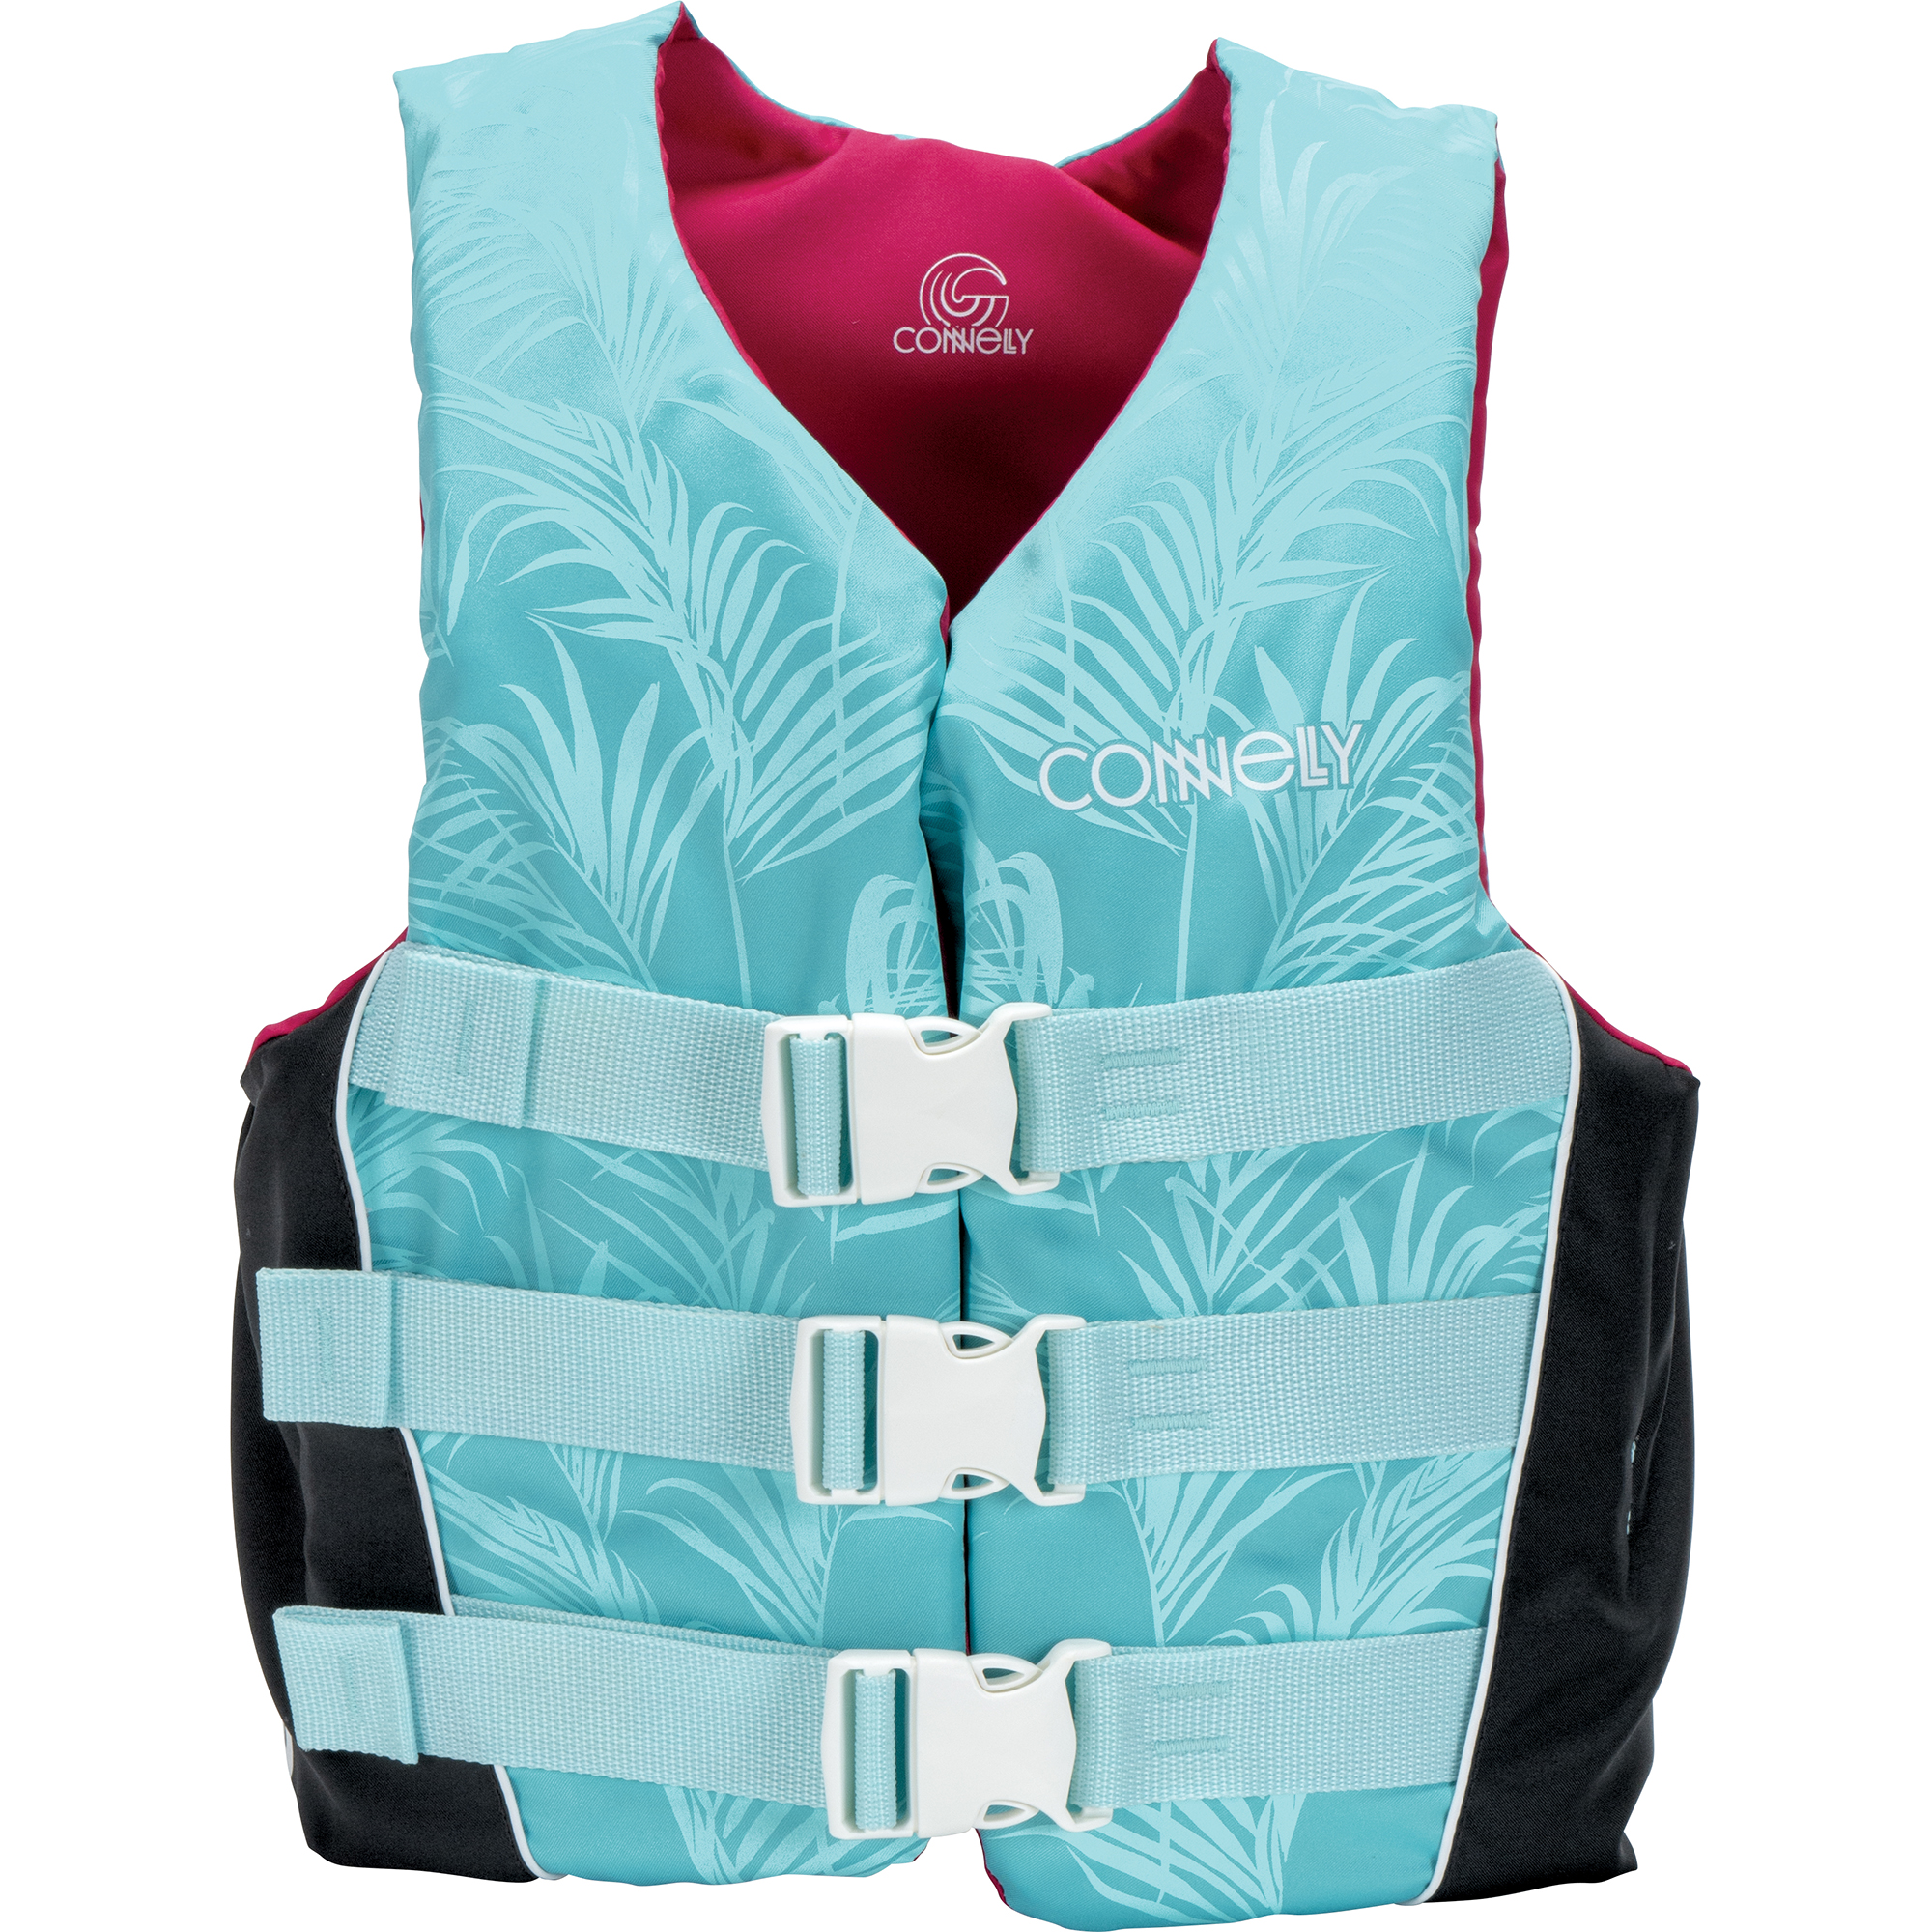 Connelly Women's Tunnel 3-Belt Nylon Life Jacket - Tropical - S